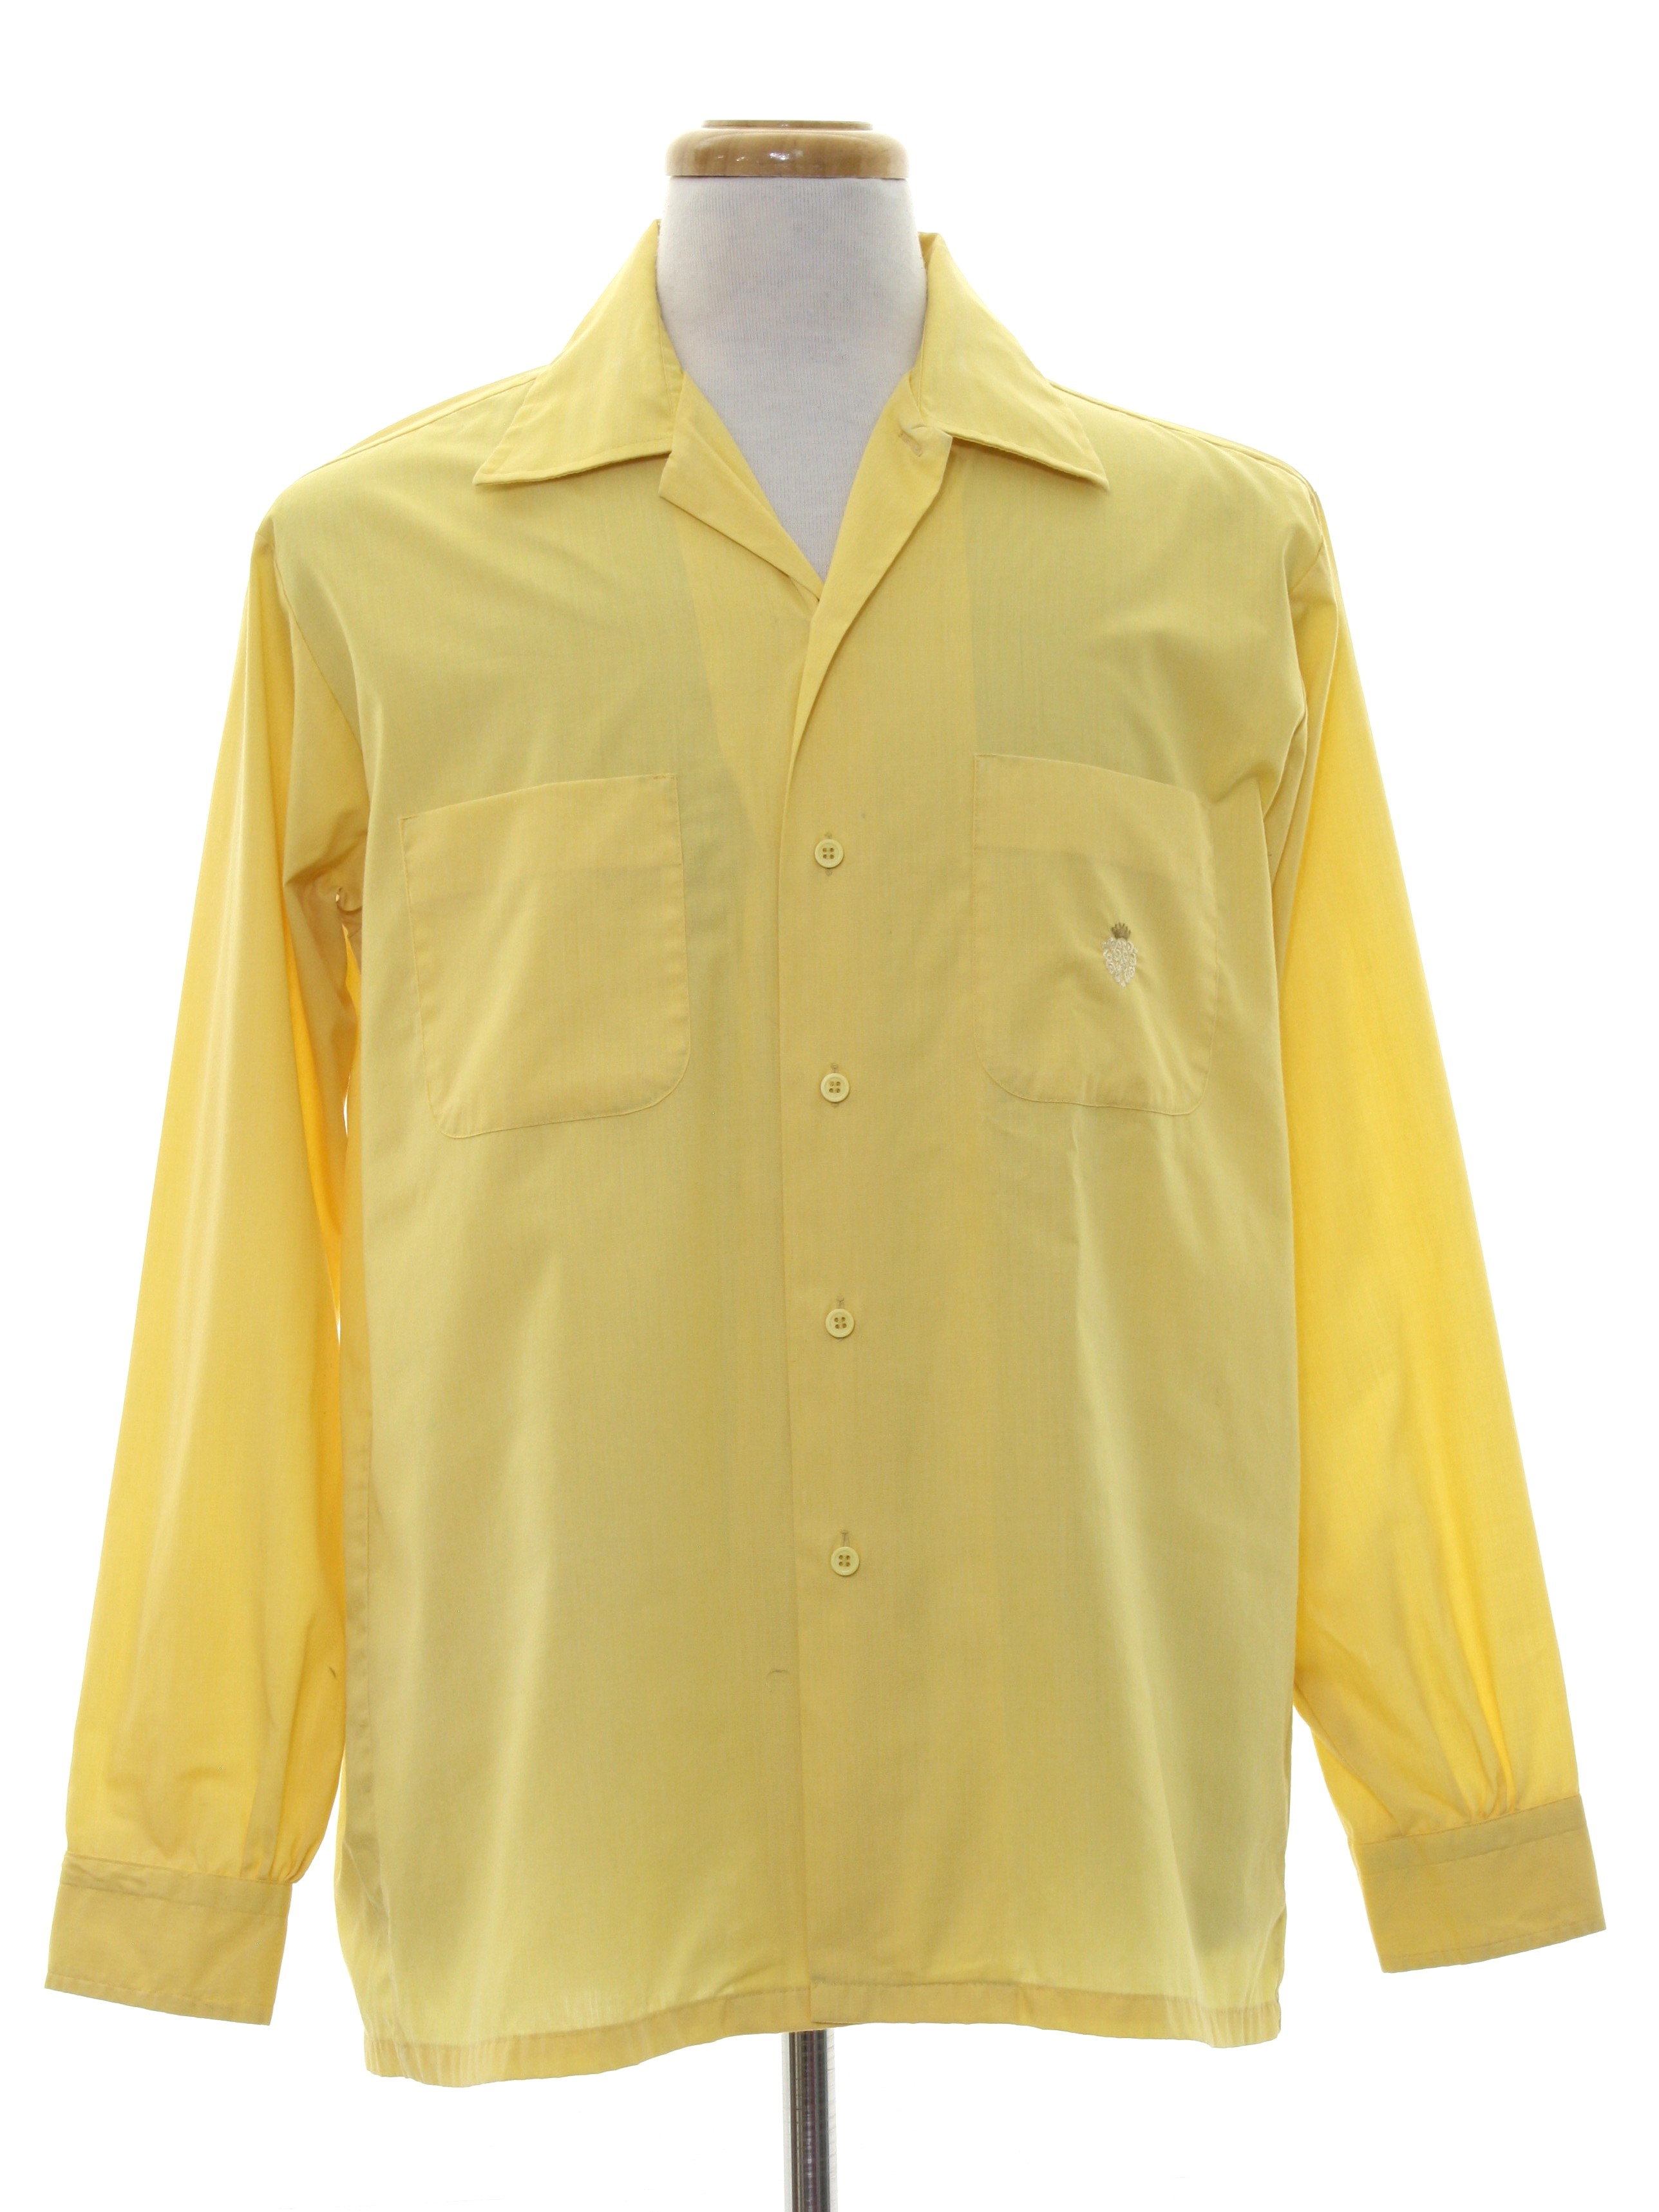 1960s Vintage Shirt: 60s -Donegal- Mens sunny yellow polyester cotton ...